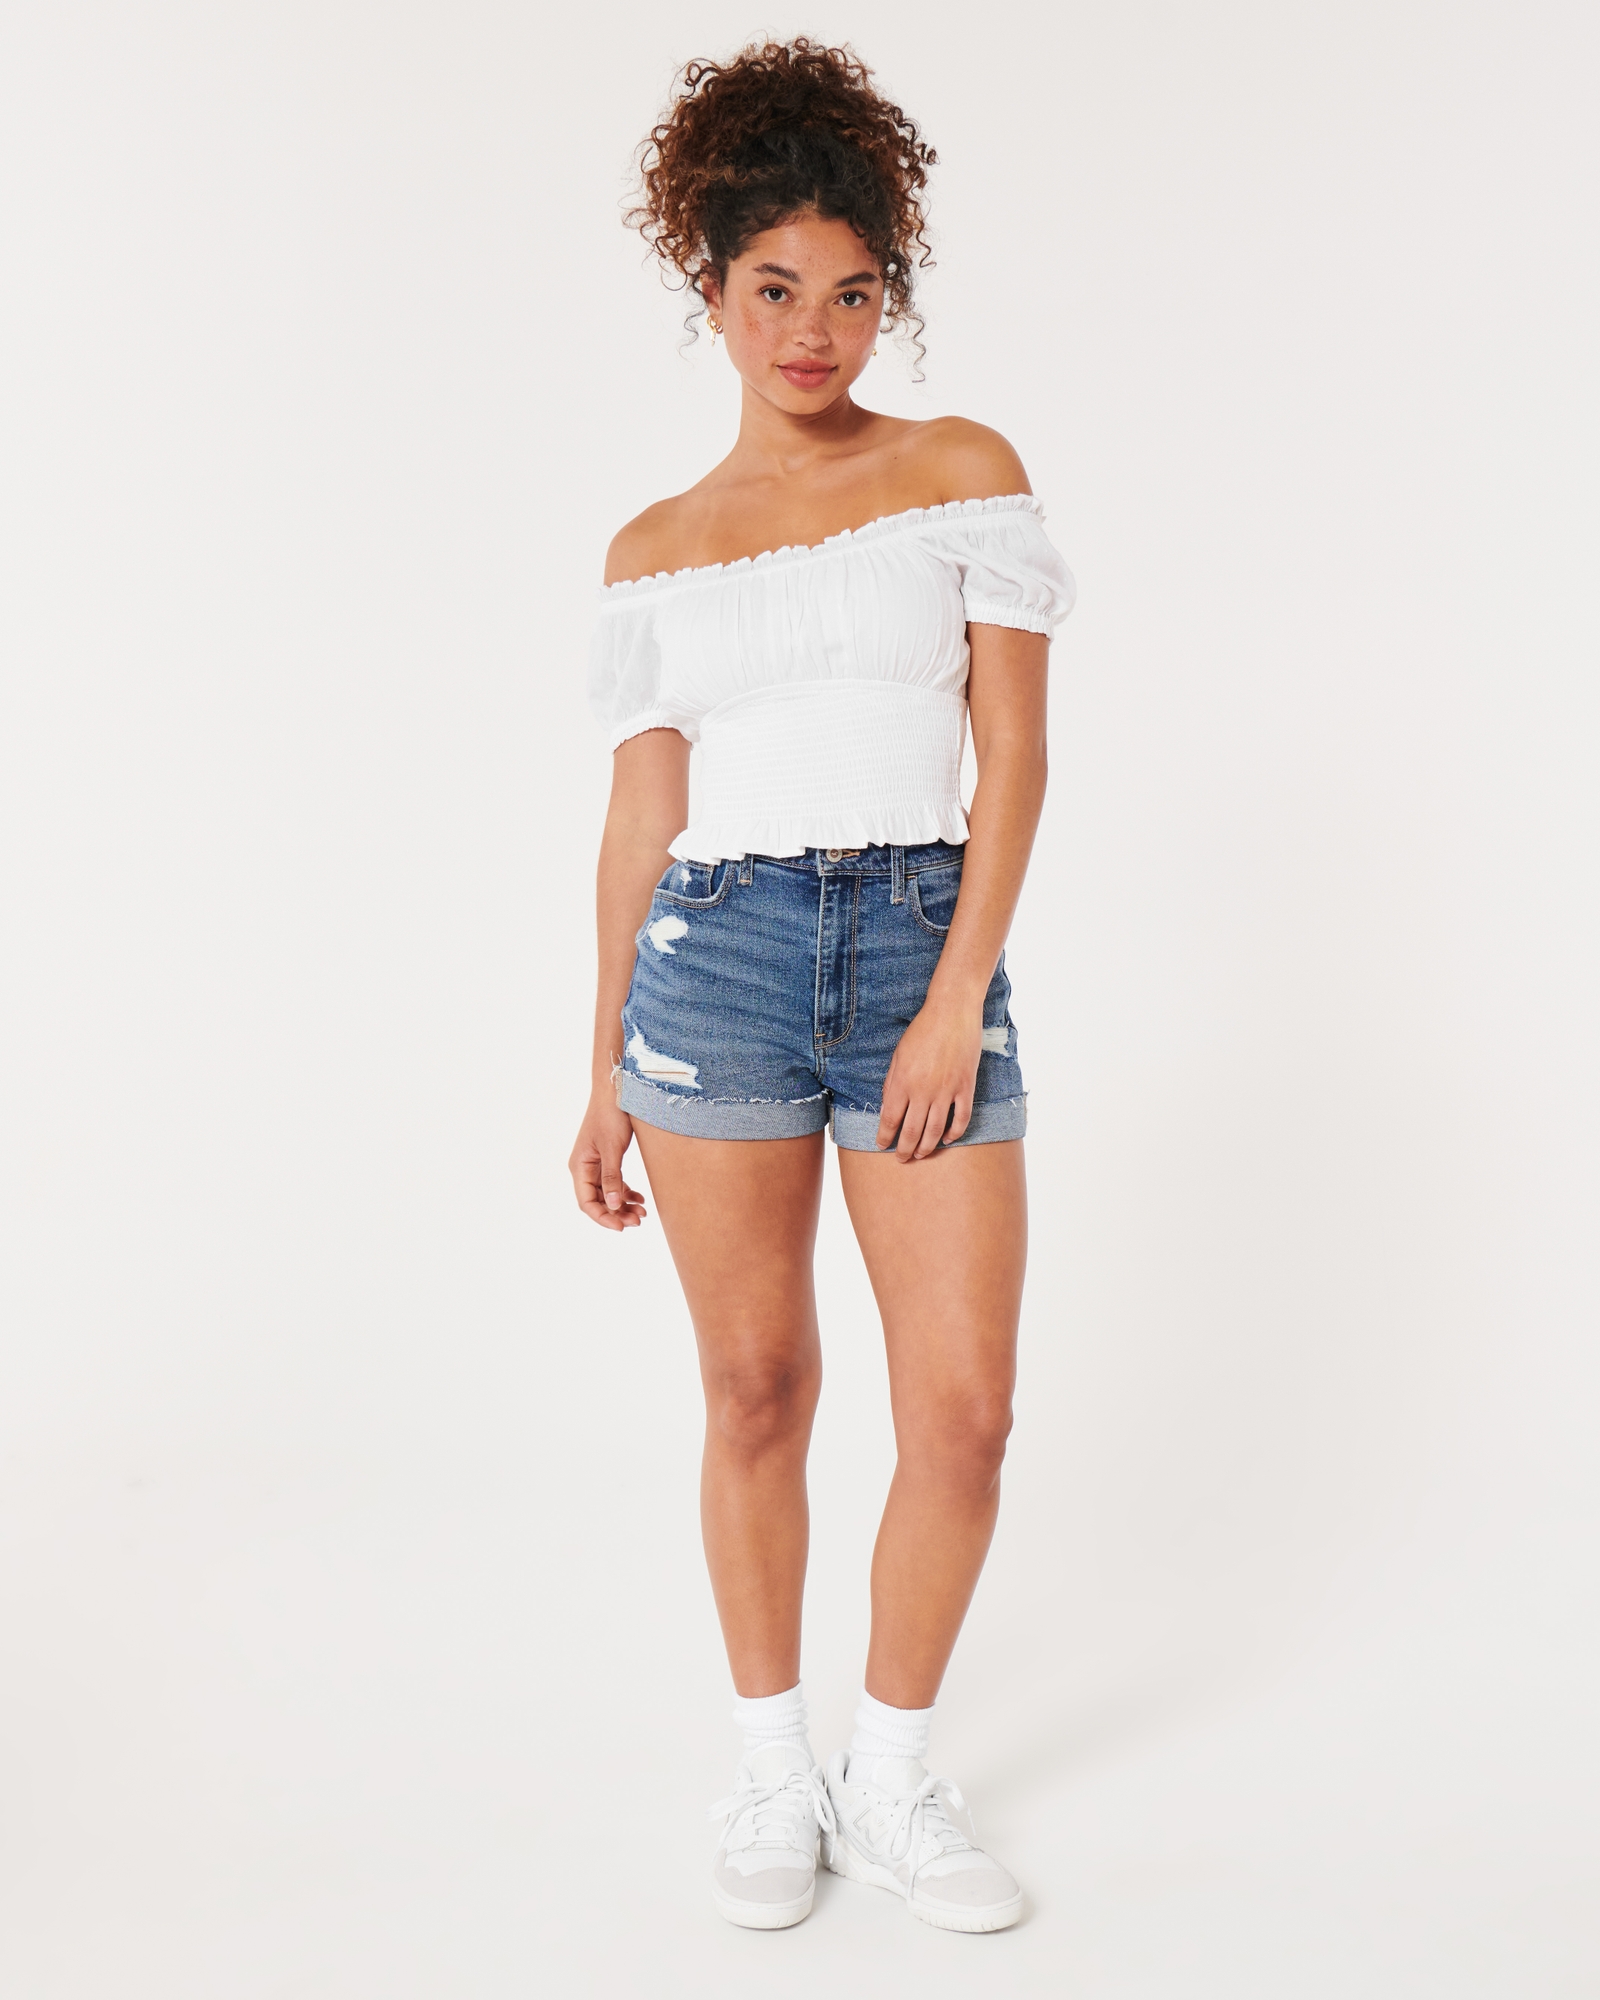 Over 65% Off Hollister Clearance  Tops from $7.99 AND Jeans Only